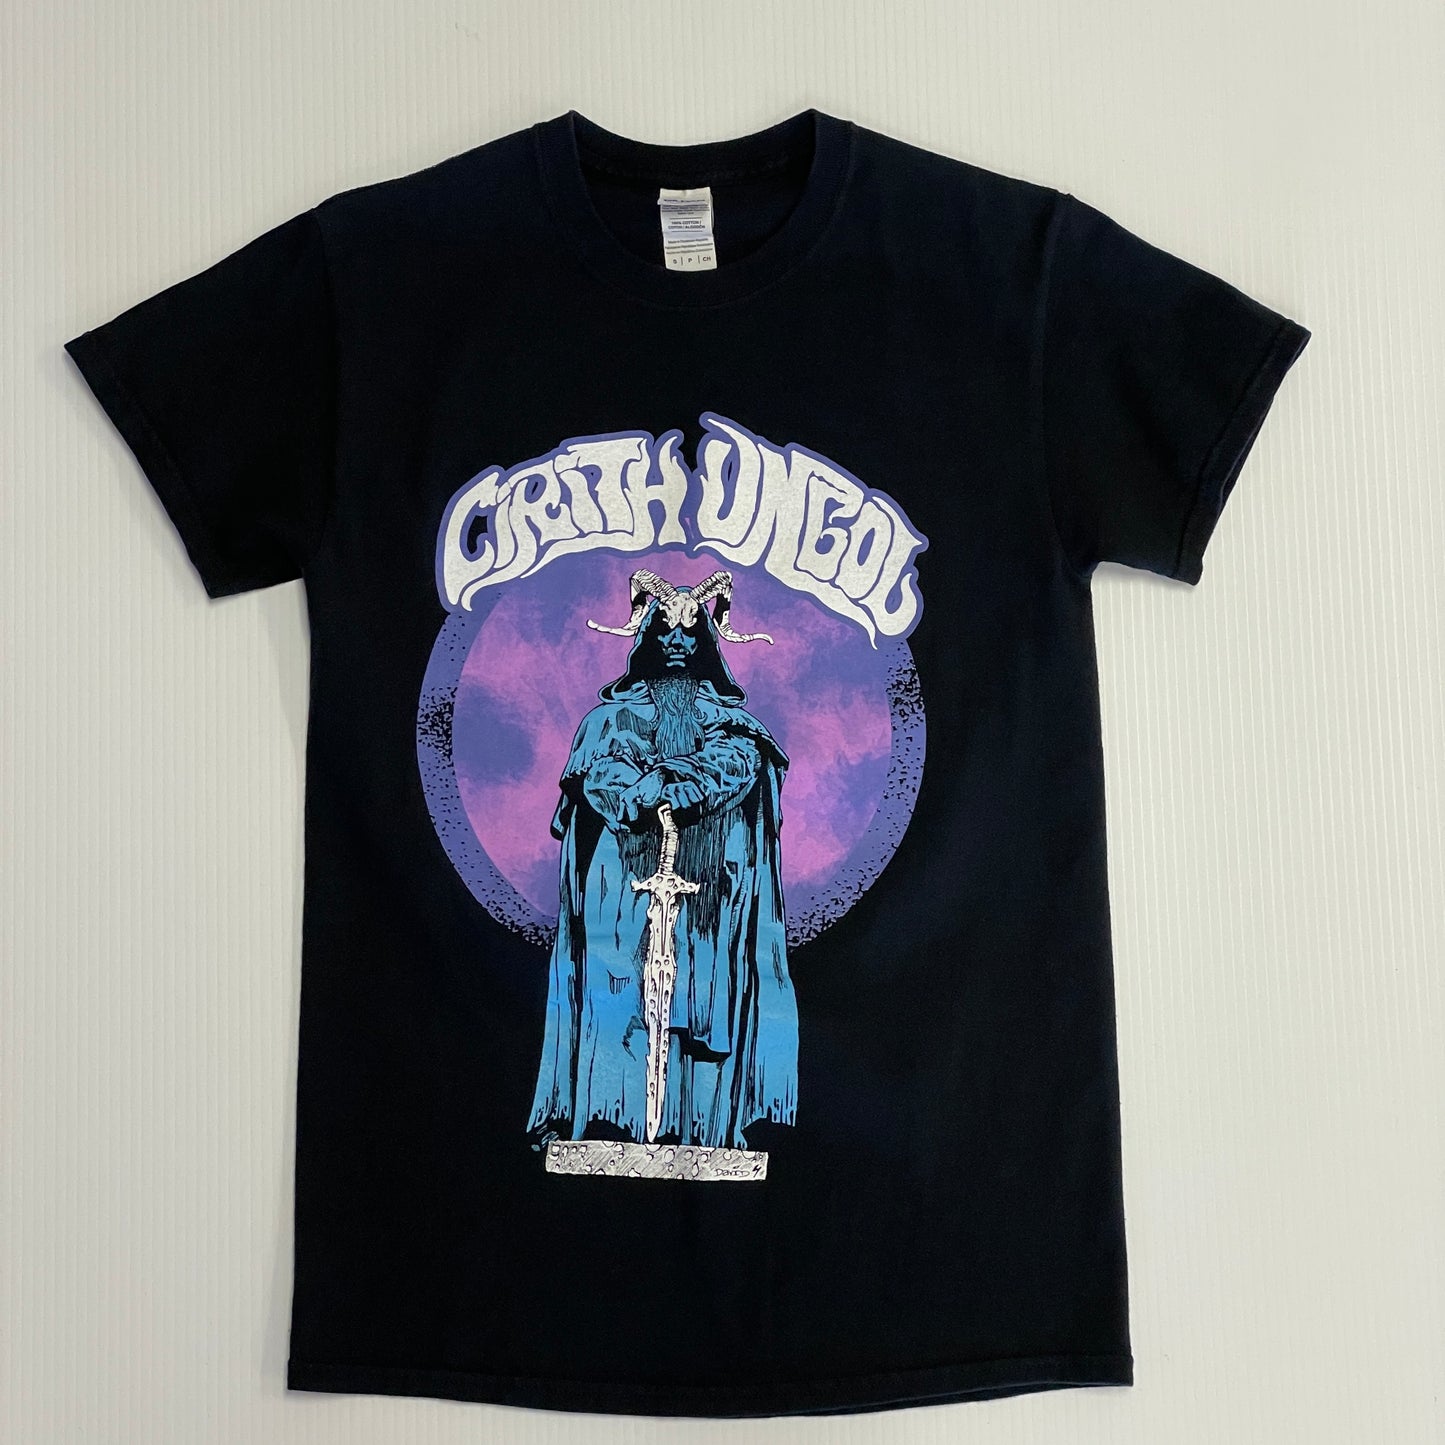 Cirith Ungol - King of the Dead vintage T-shirt